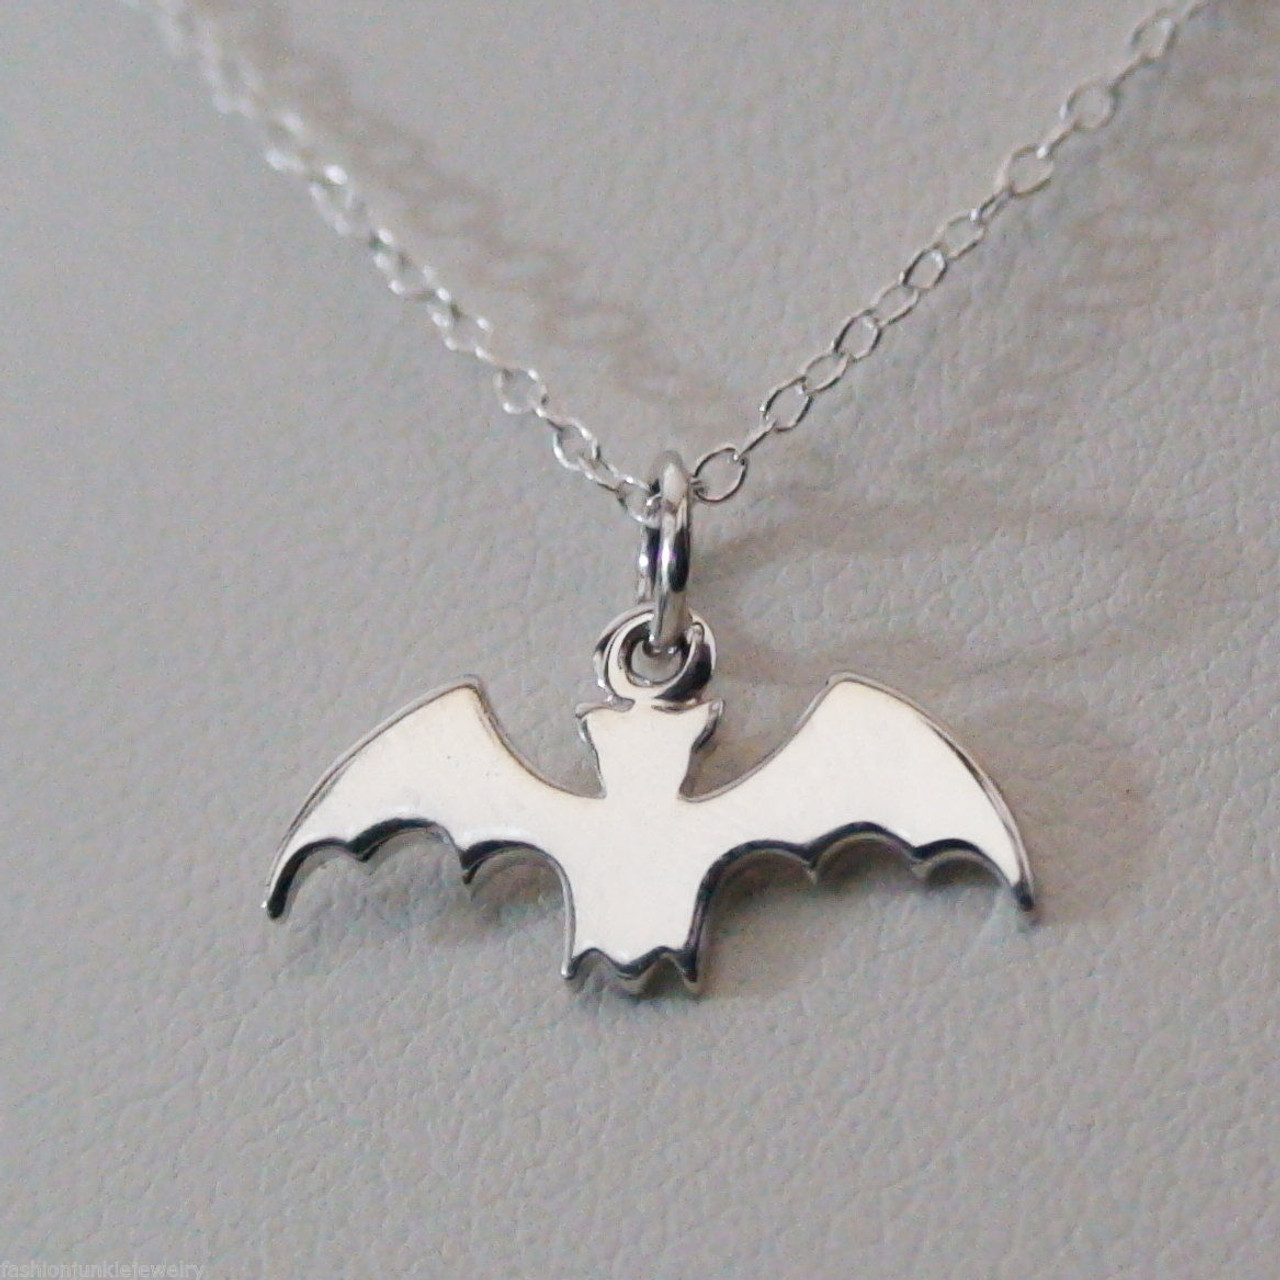 AOVEAO Necklace for Men Women Sterling Silver Bat Pendant Necklaces for  Boys Daughter Jewelry Birthday Gift - Walmart.com